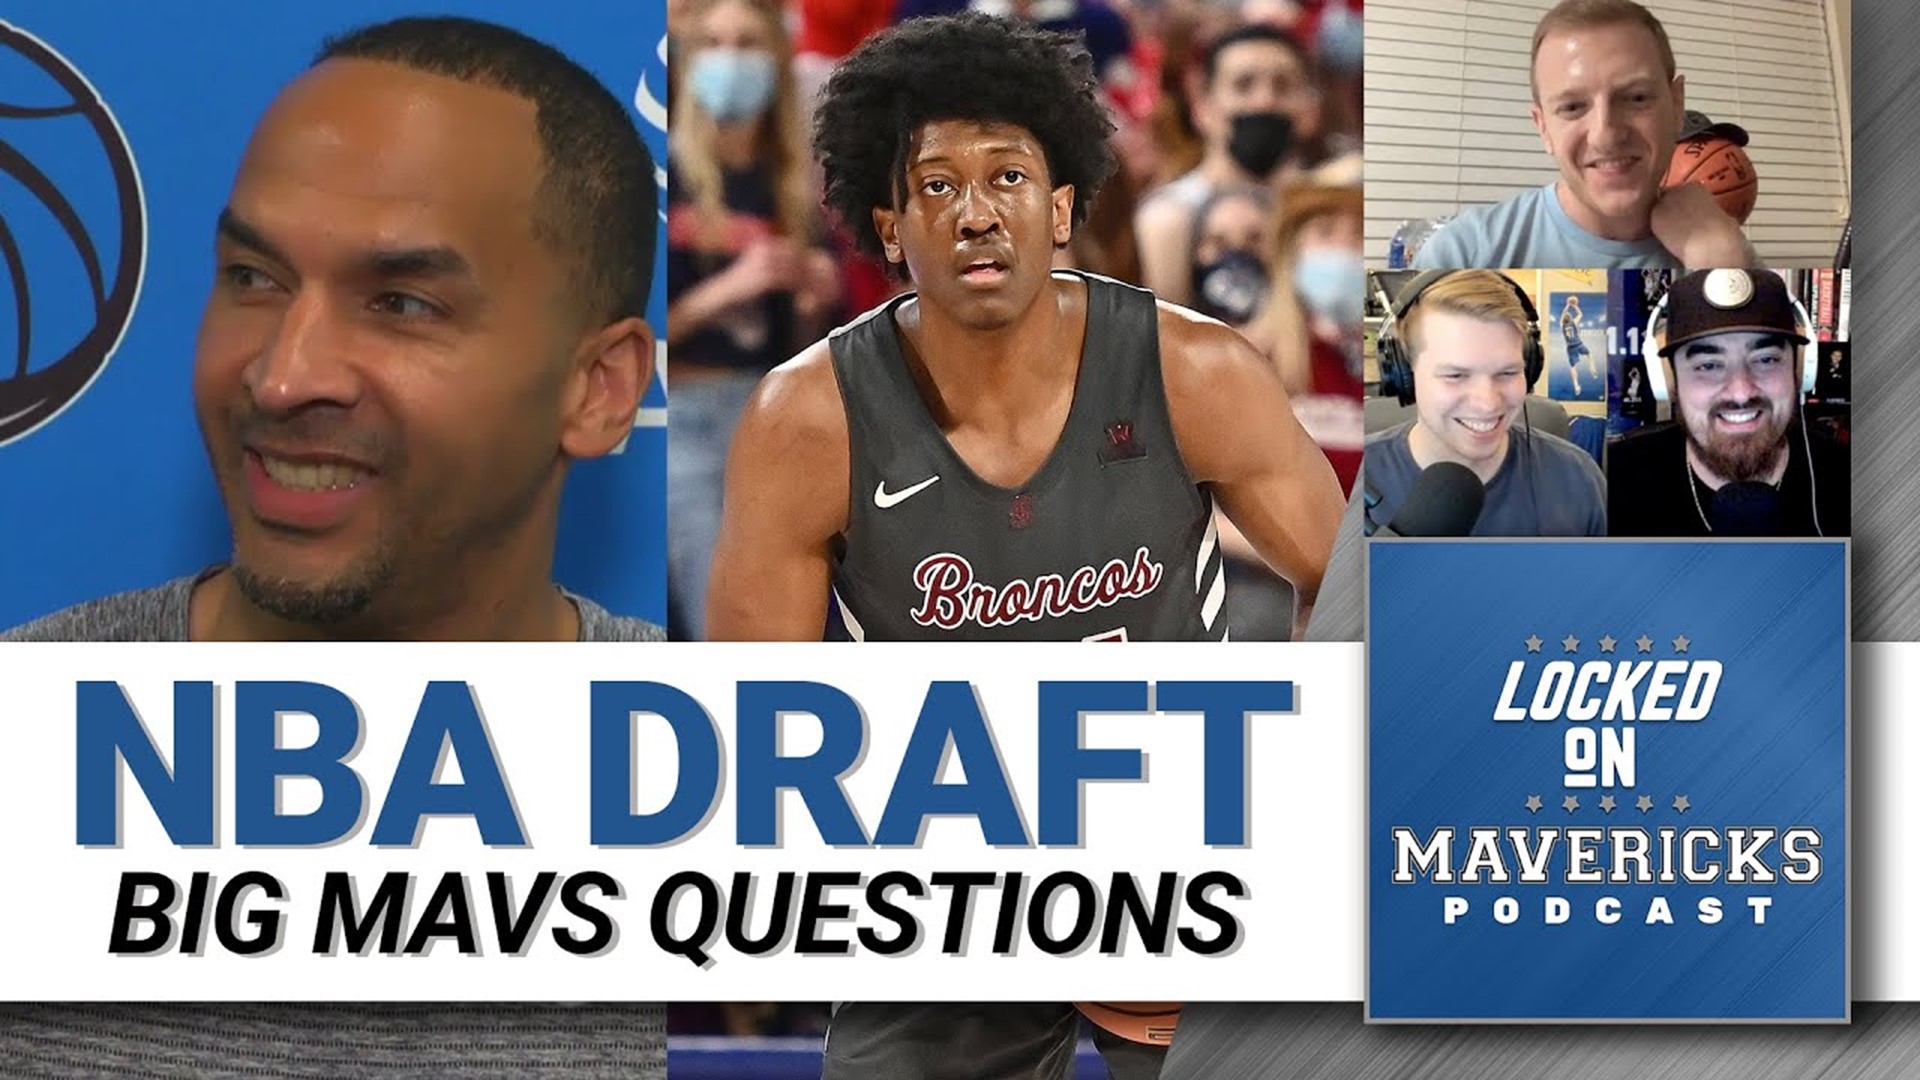 The Dallas Mavericks have the 26th pick in the 2022 NBA Draft, who should they target?